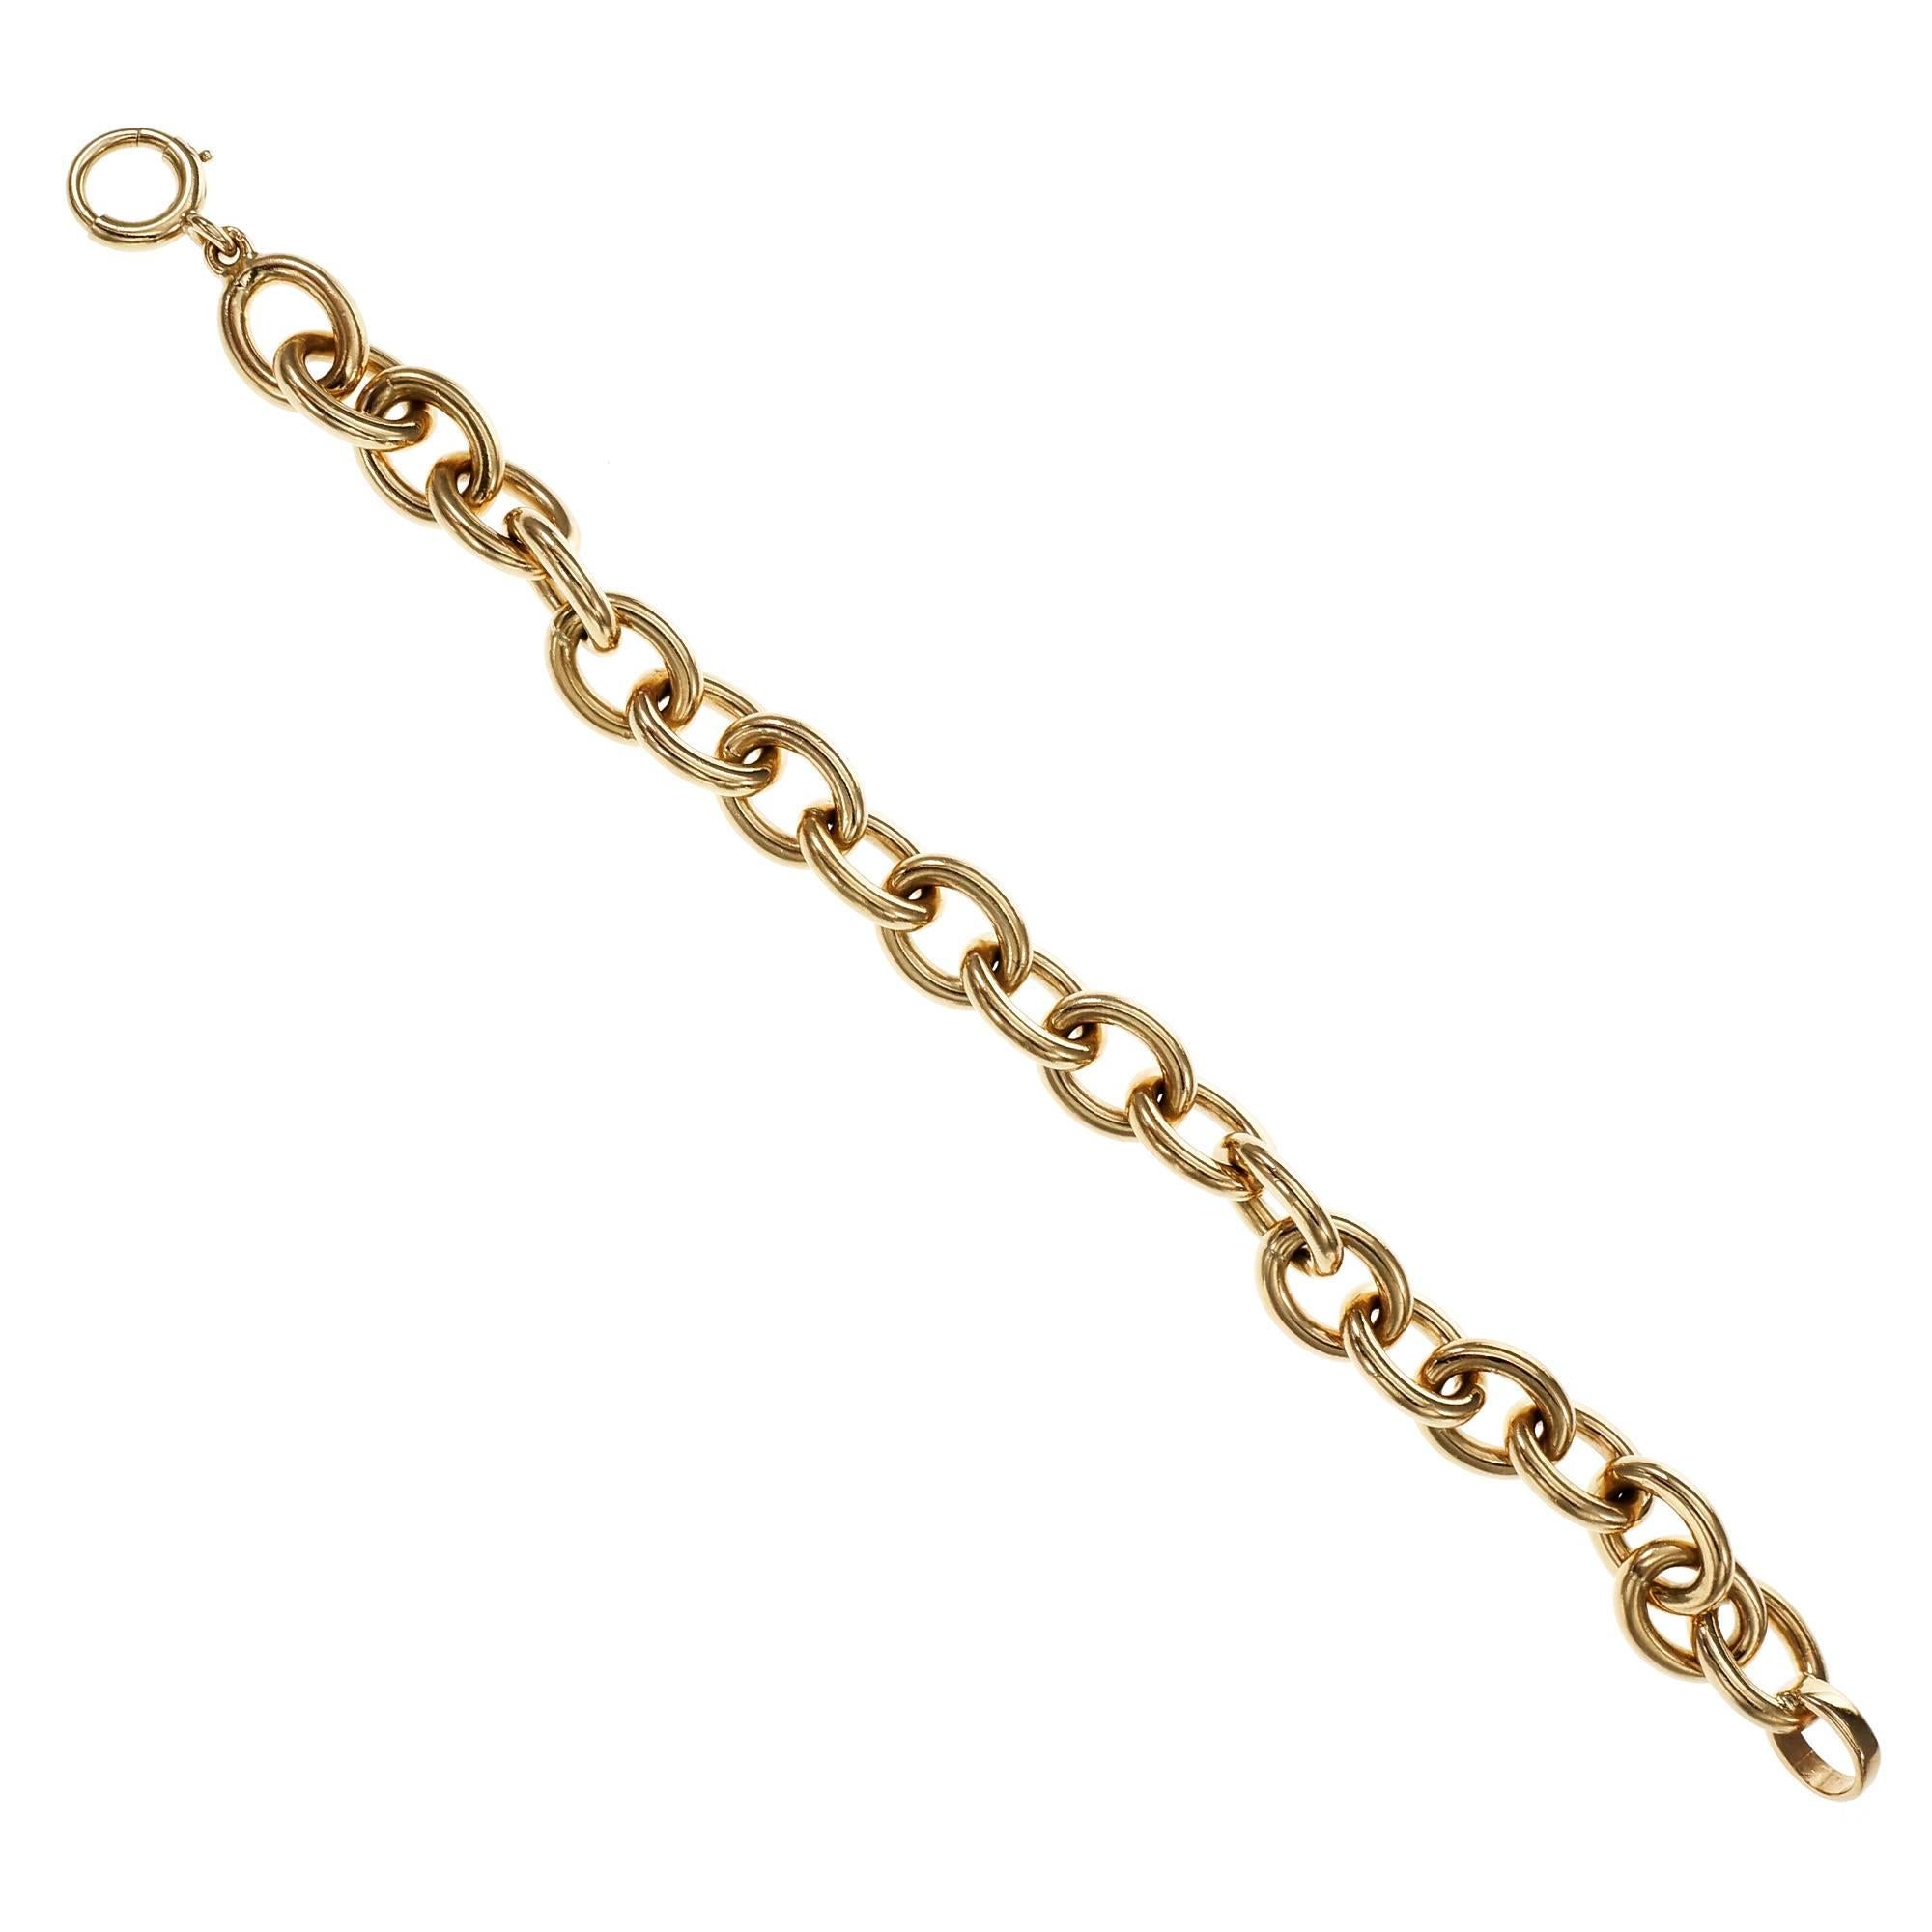 Solid oval link 14k yellow gold with original spring ring bracelet. Circa 1940s.

14k yellow gold
39.5 grams
Tested and stamped: 14k
Length: 7.25 inches – Width: 10.19mm – Depth: 2.50mm
